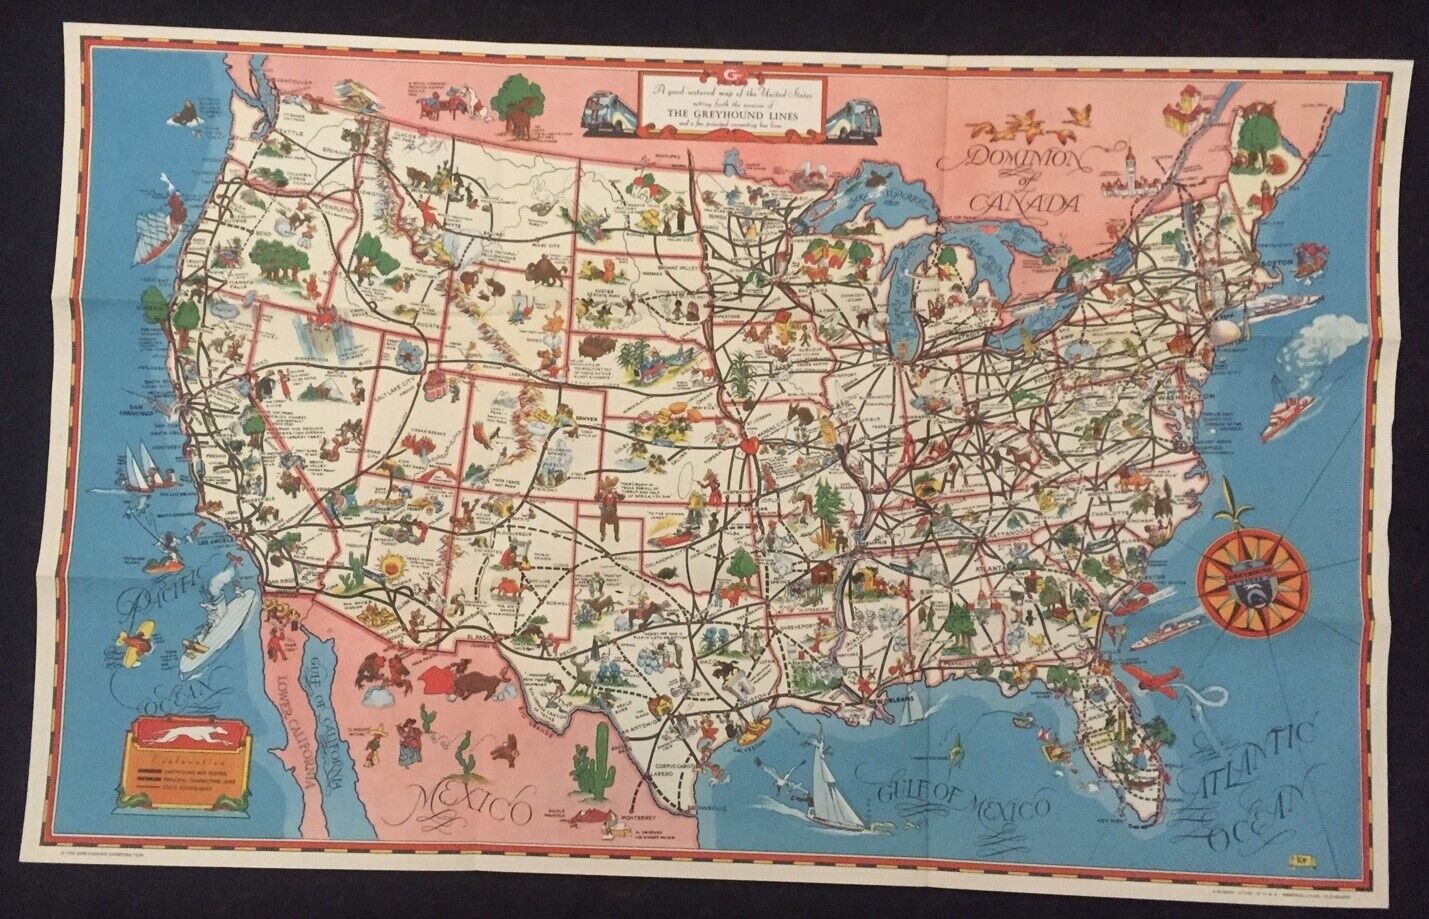 Original 1939 Greyhound Pictorial Map of the United States